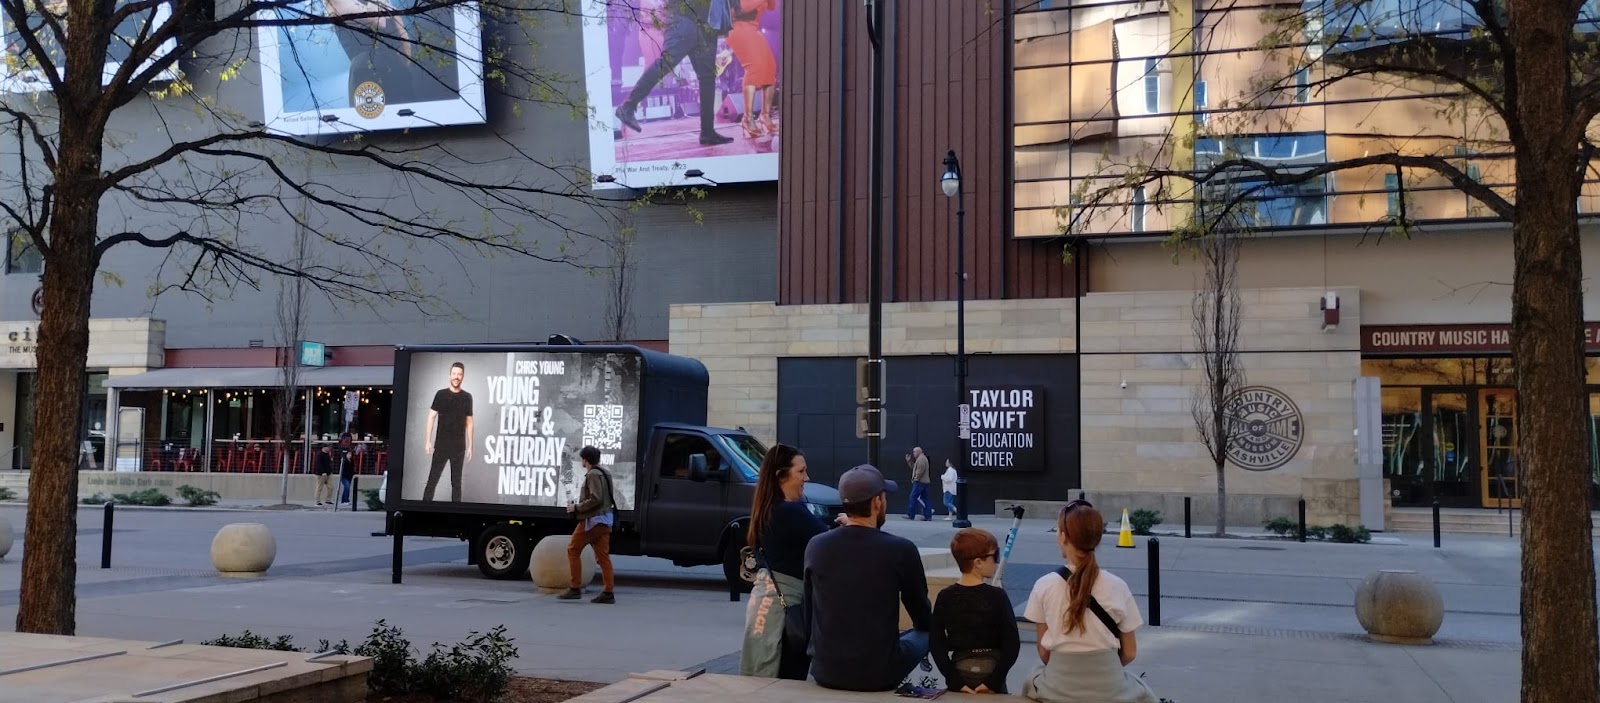 Advertisement truck with Chris Young ad parked beside a side walk with a crowd in front of Country Music Hall of Fame in Nashville.